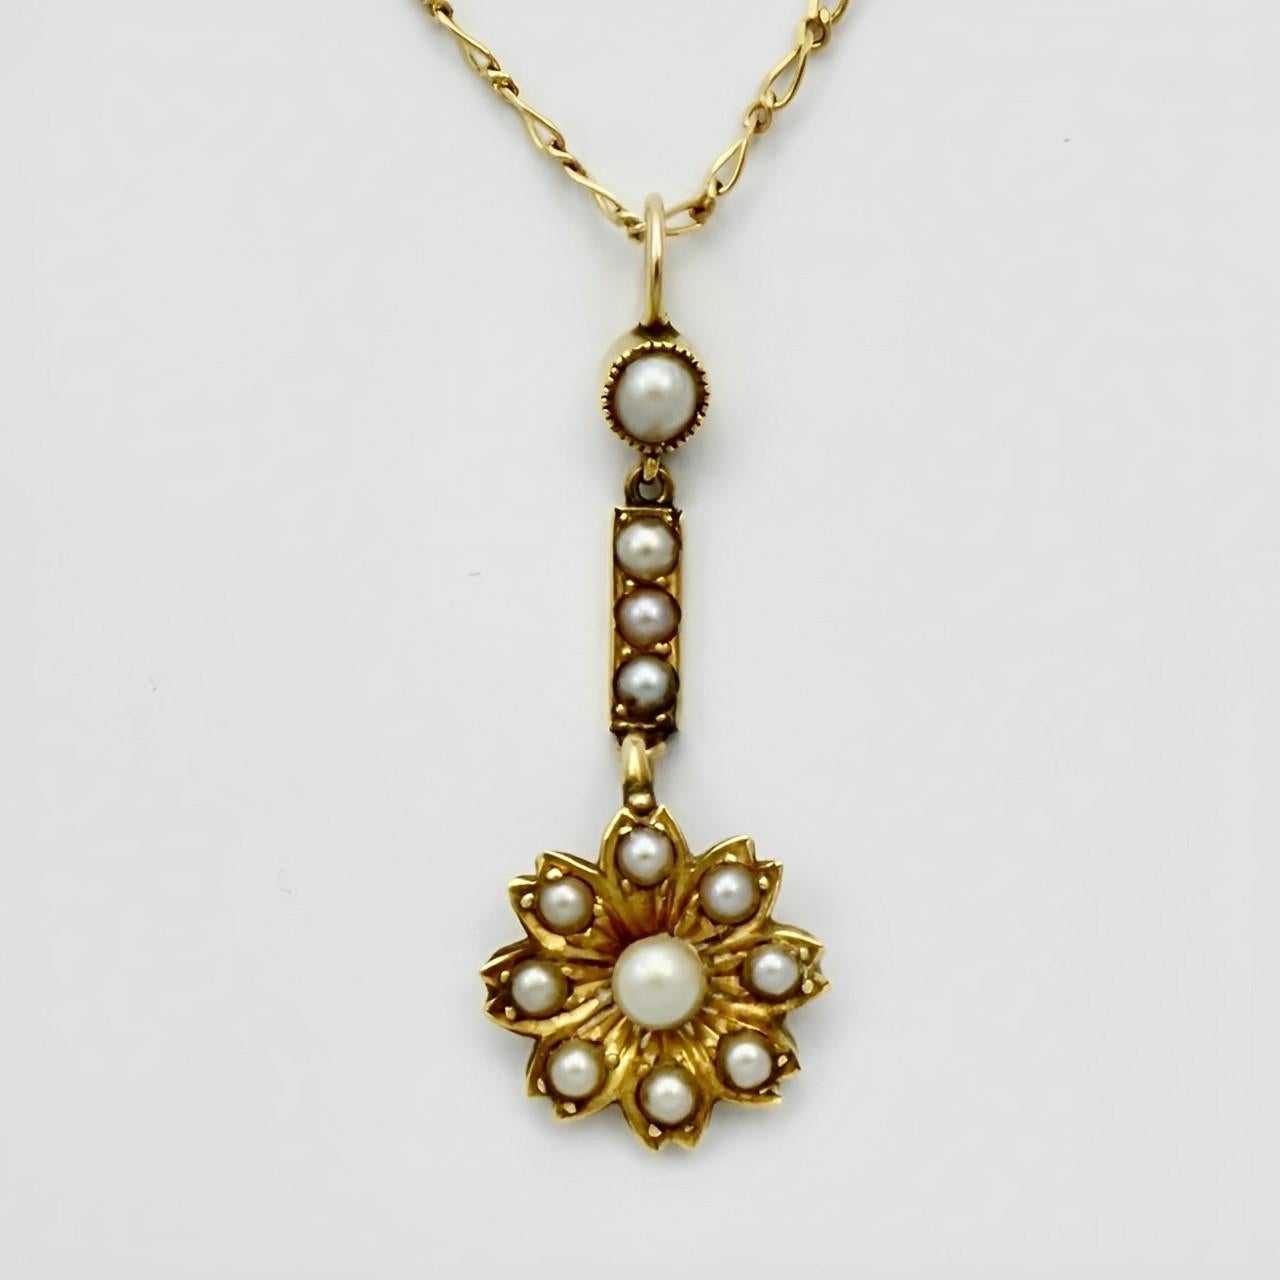 Lovely antique gold and seed pearl flower drop pendant with a 9K gold figaro chain necklace. The antique pendant is not marked but tests as 18K gold. The Italian gold necklace is of a later date than the pendant. Measuring length 50 cm / 19.6